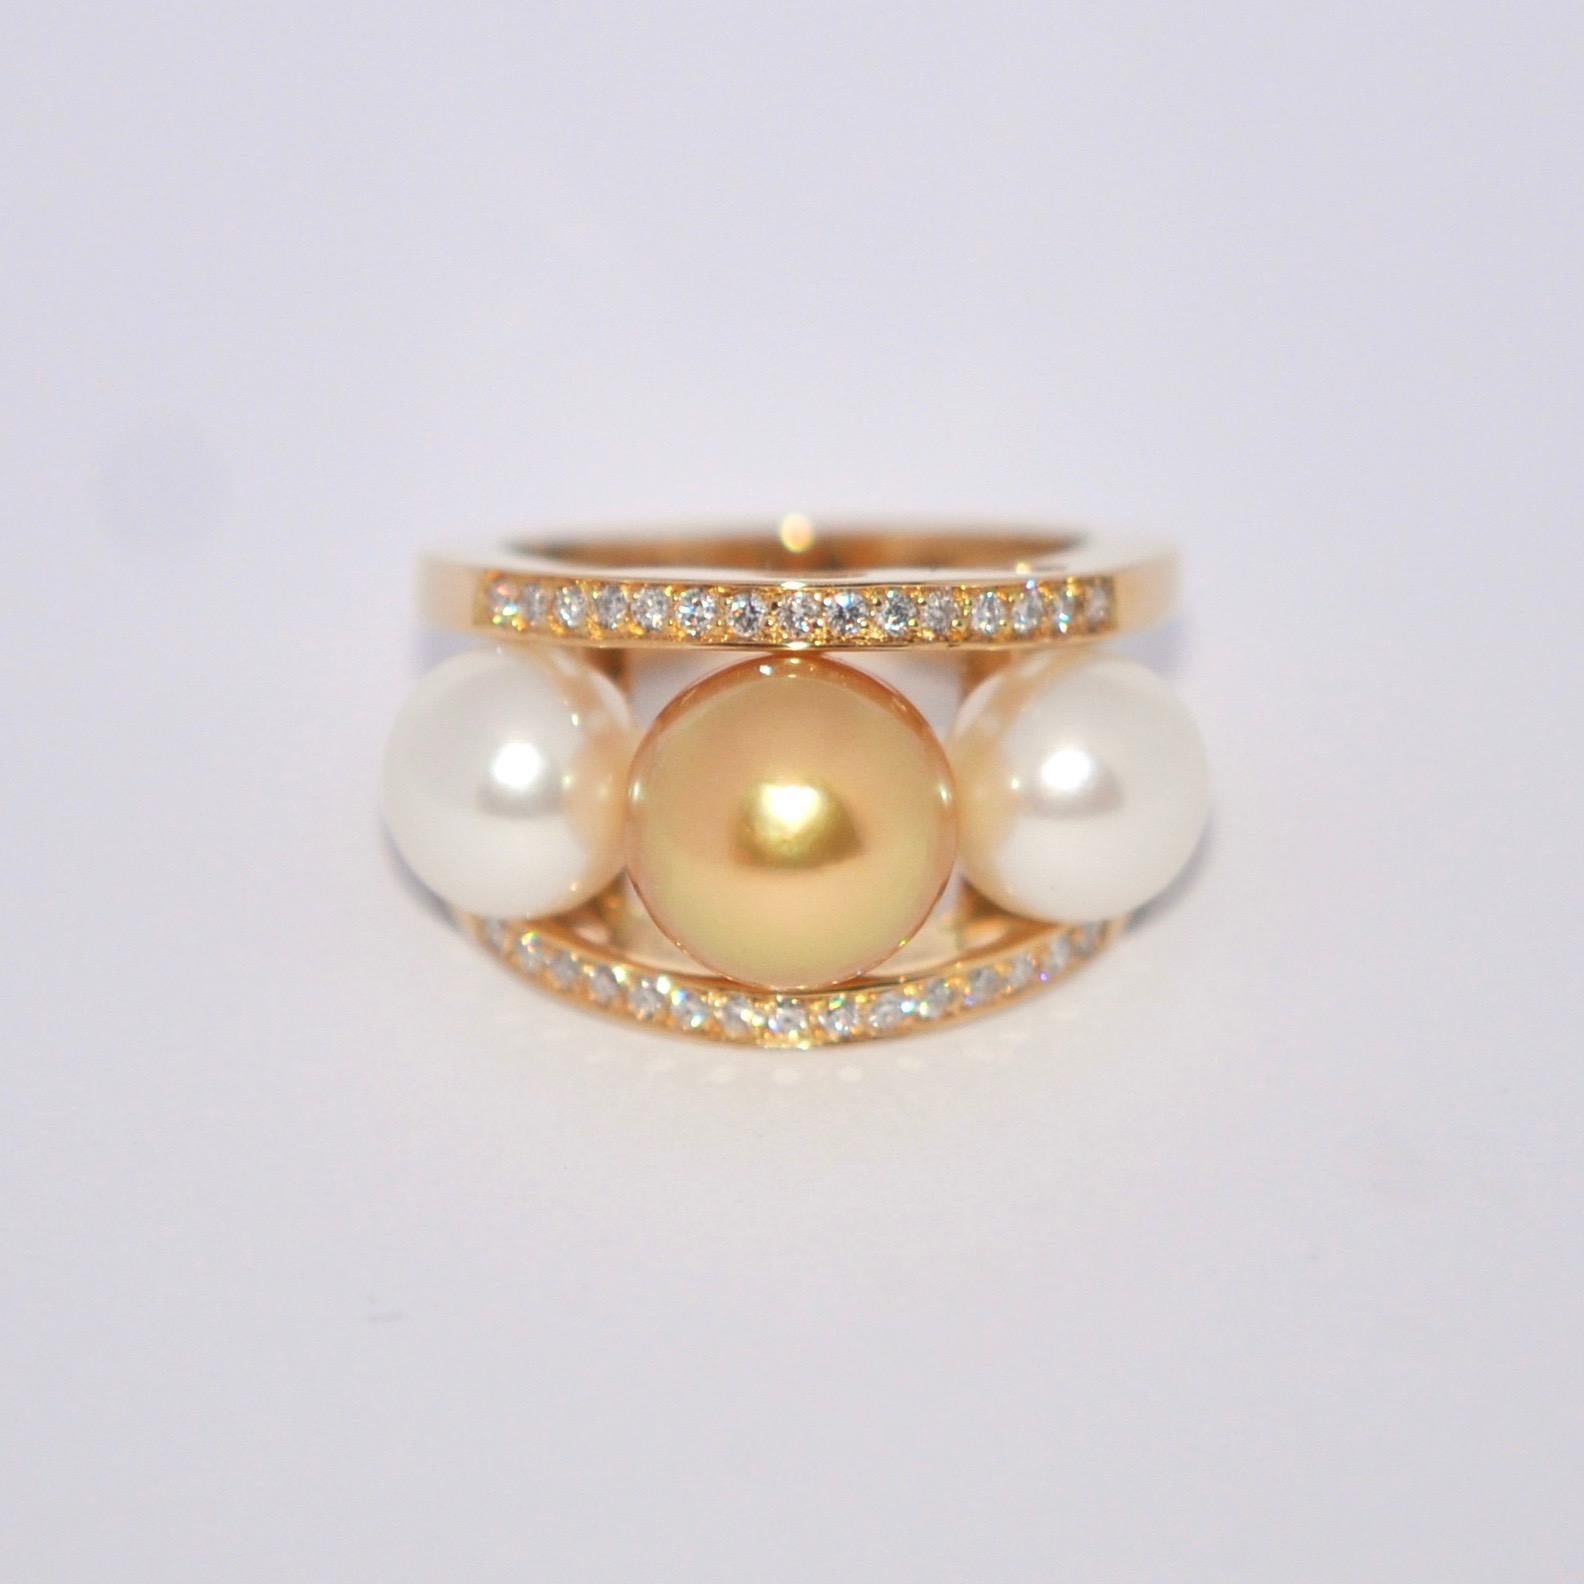 Discover this South Sea Pearl and White Diamonds on Yellow Gold 18 Karat Fashion Ring.
Gold South Sea Pearl 10 mm
South Sea Pearl 8 mm
White Diamonds 0.3 Karat
Yellow Gold 18 Karat
French Size 53
US Size 6.5